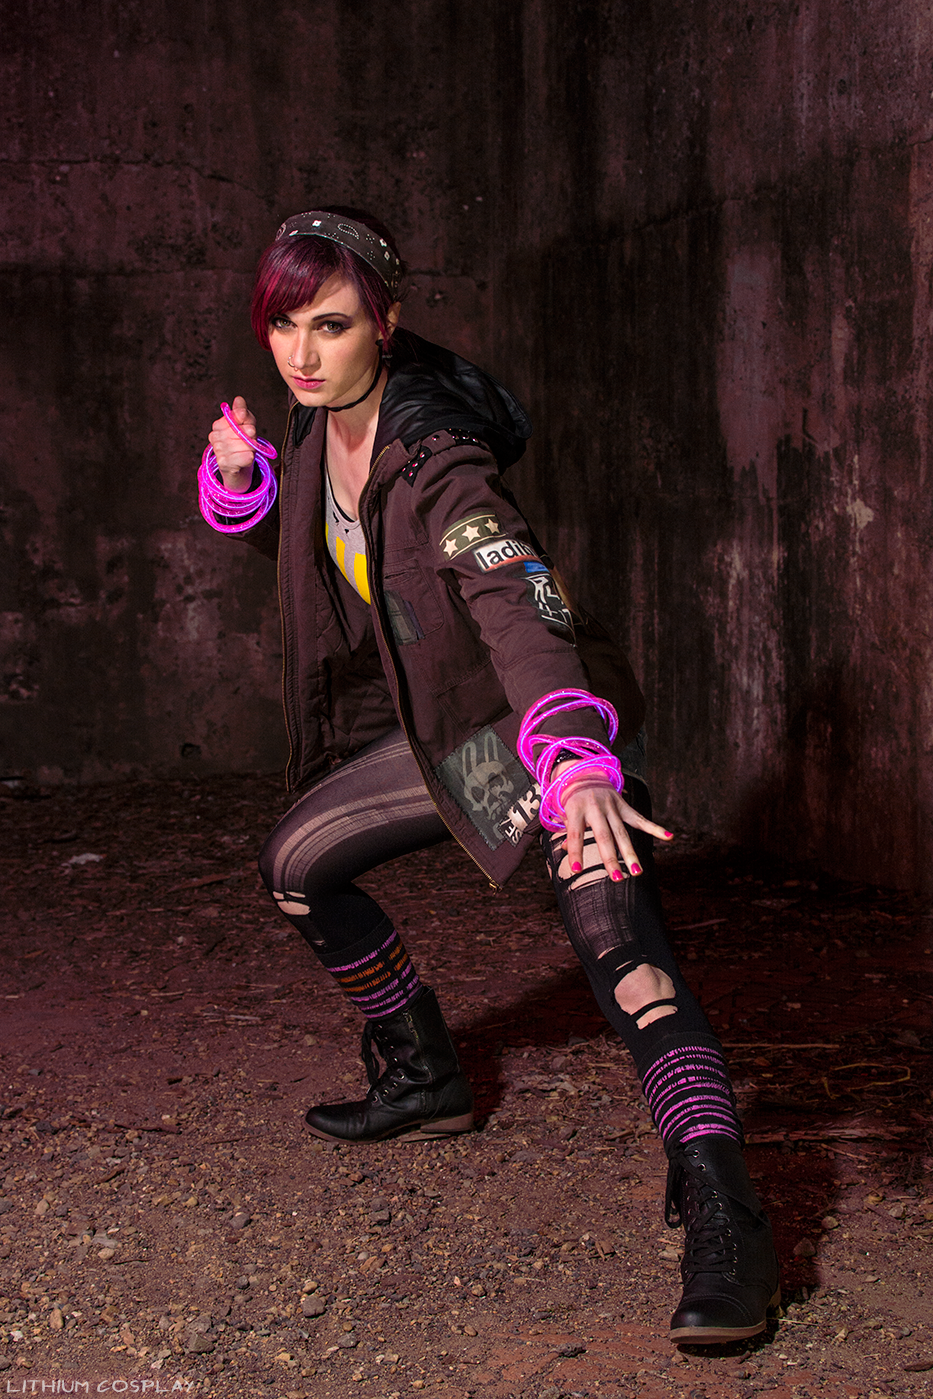 krølle pakistanske Ved daggry Neon Powers - Fetch - Infamous First Light by Lithium-Toxide on DeviantArt